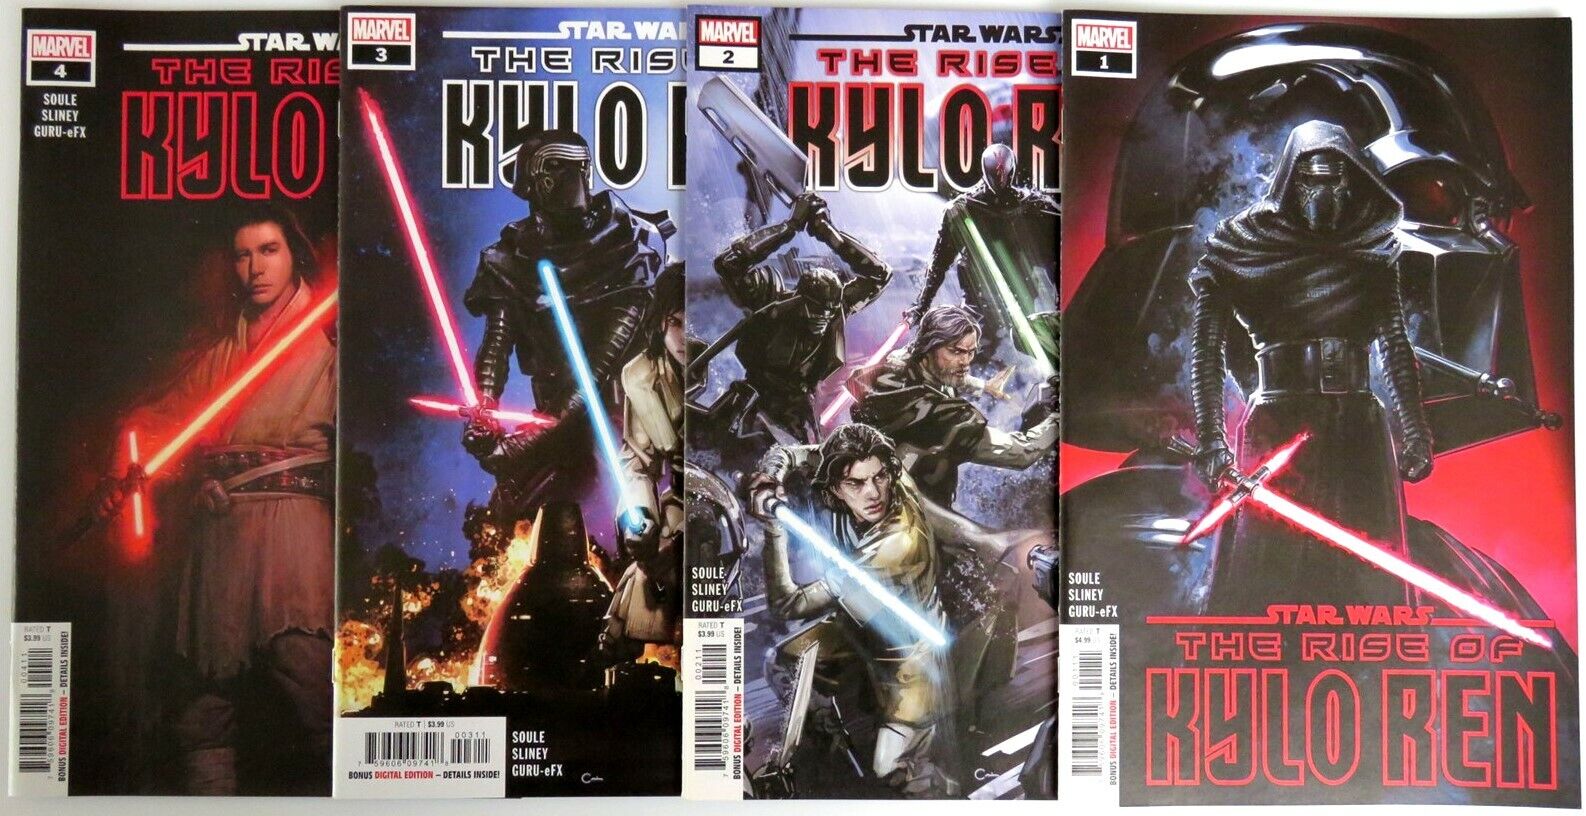 Star Wars The RISE OF KYLO REN (4) issue comic SET #1 2 3 4 Marvel 1st print